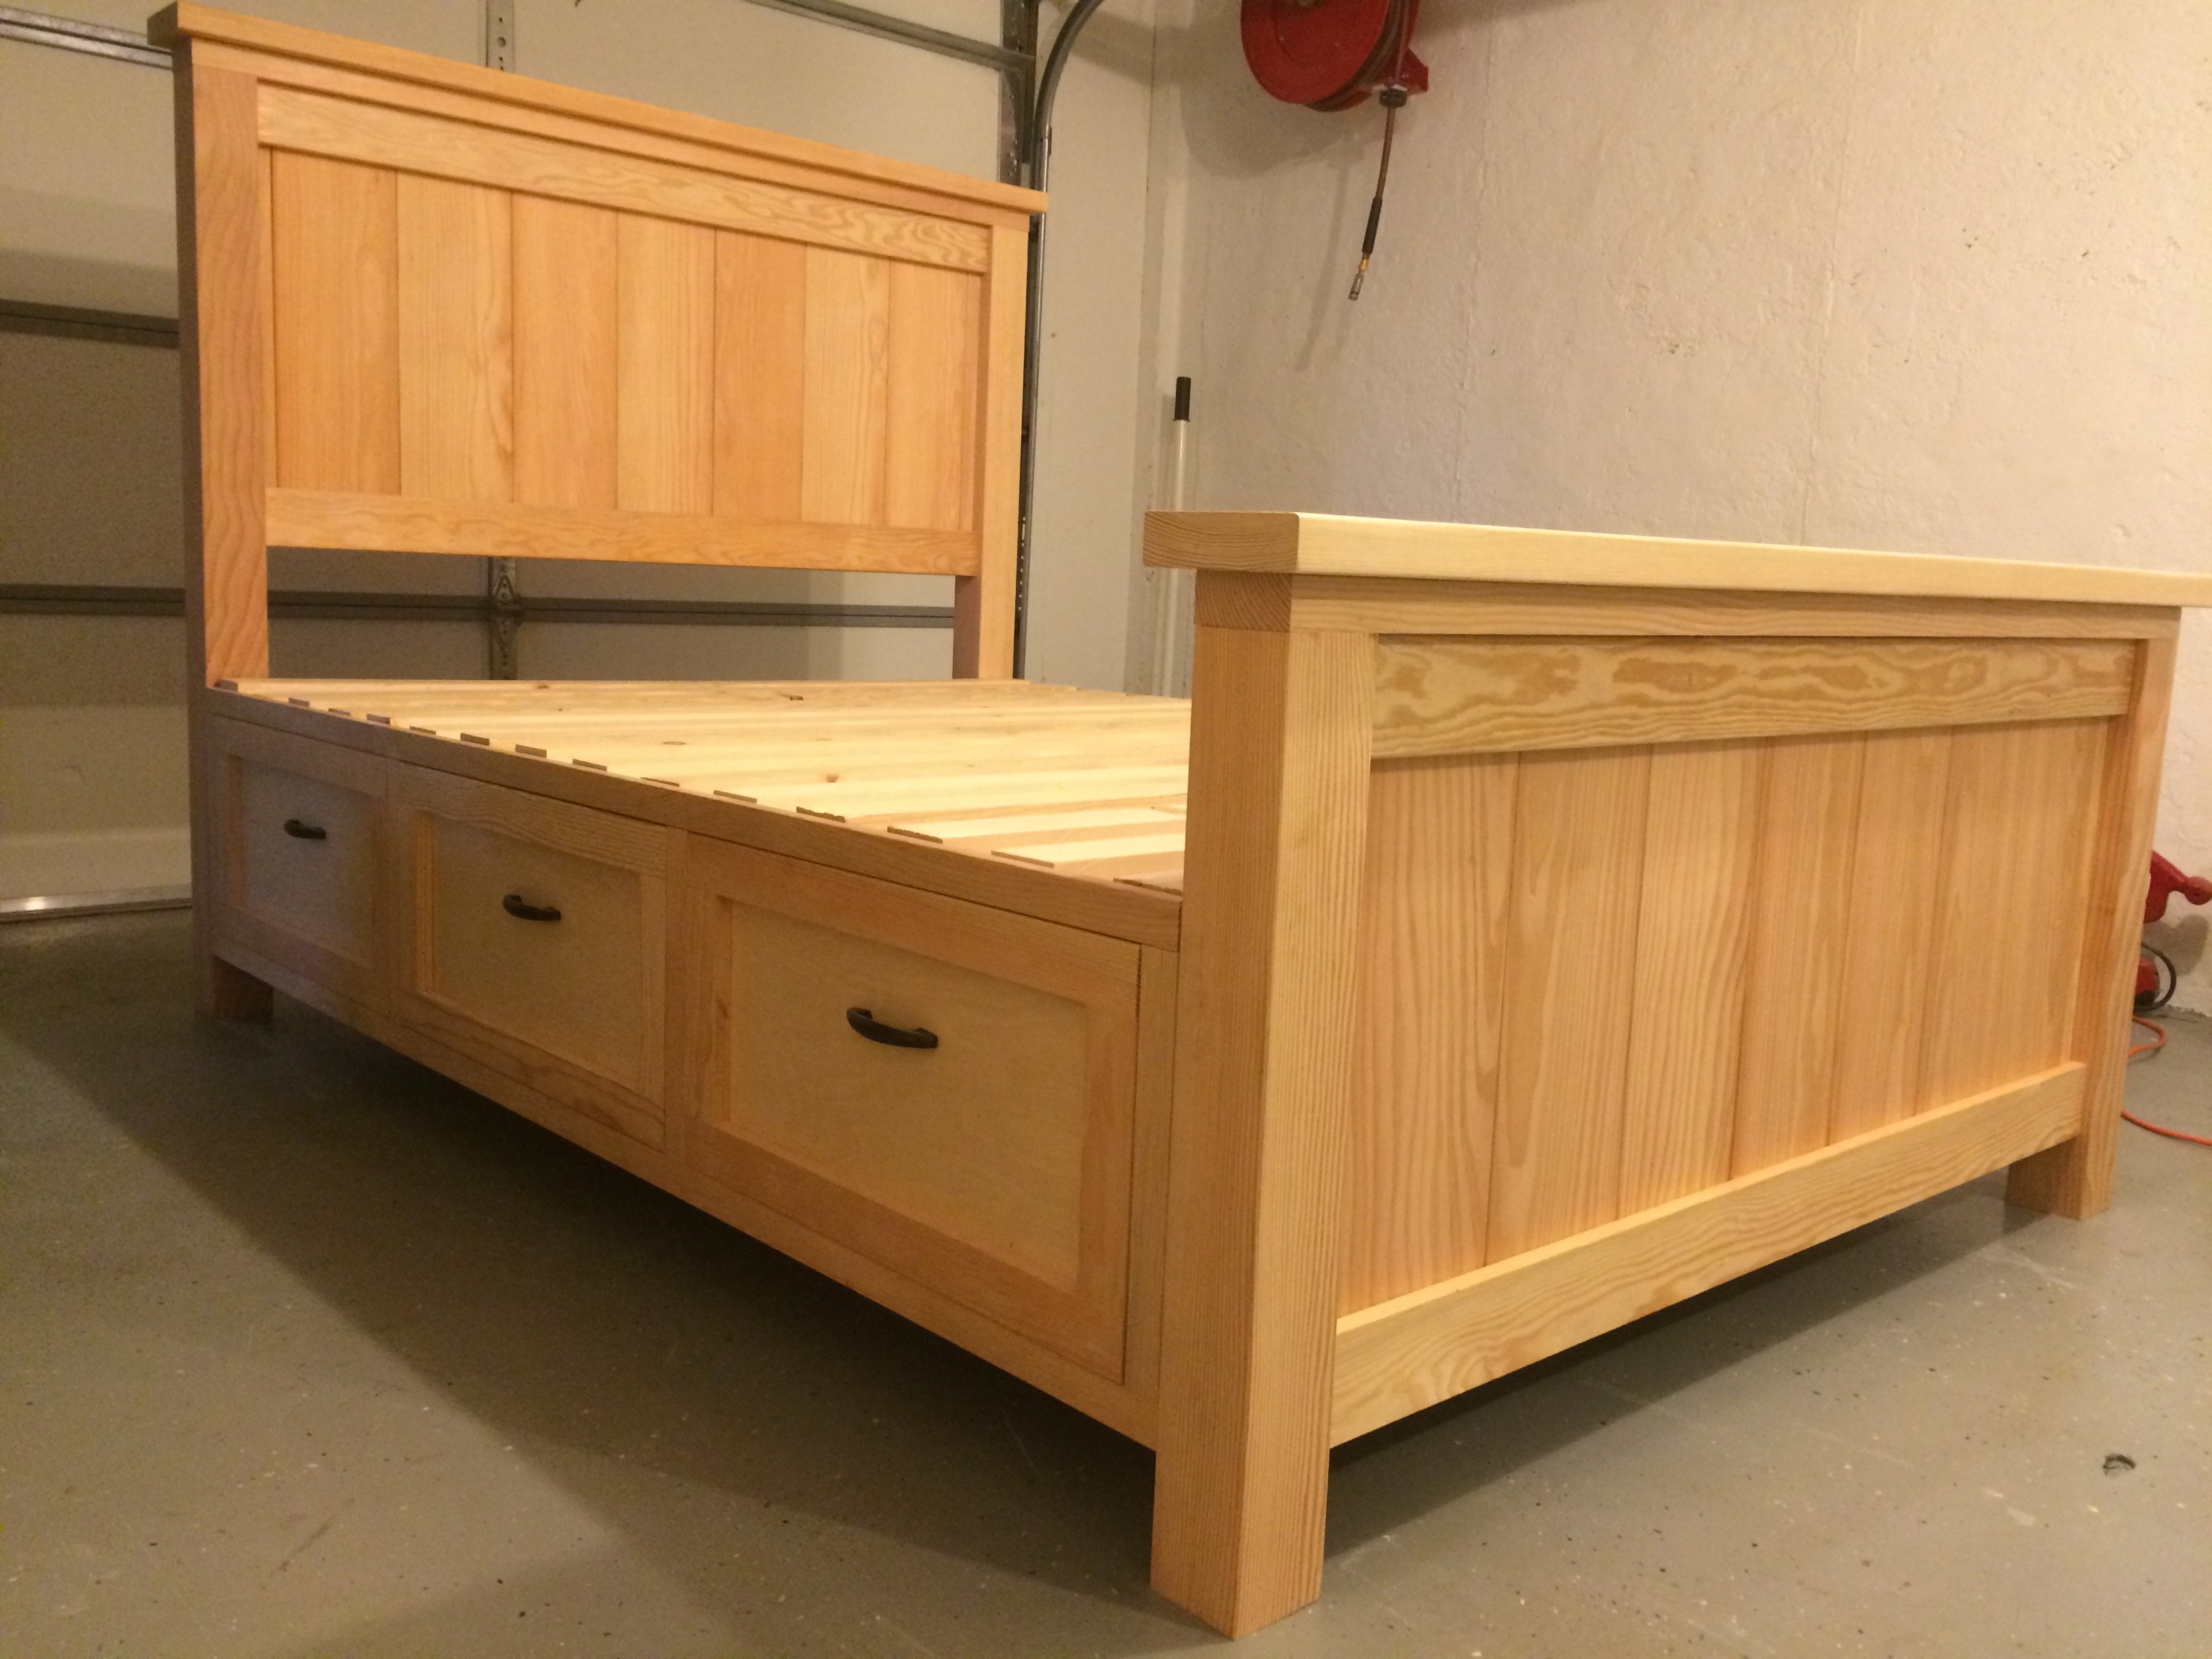 Farmhouse Storage Bed With Drawers, Farmhouse Bed Frame Diy